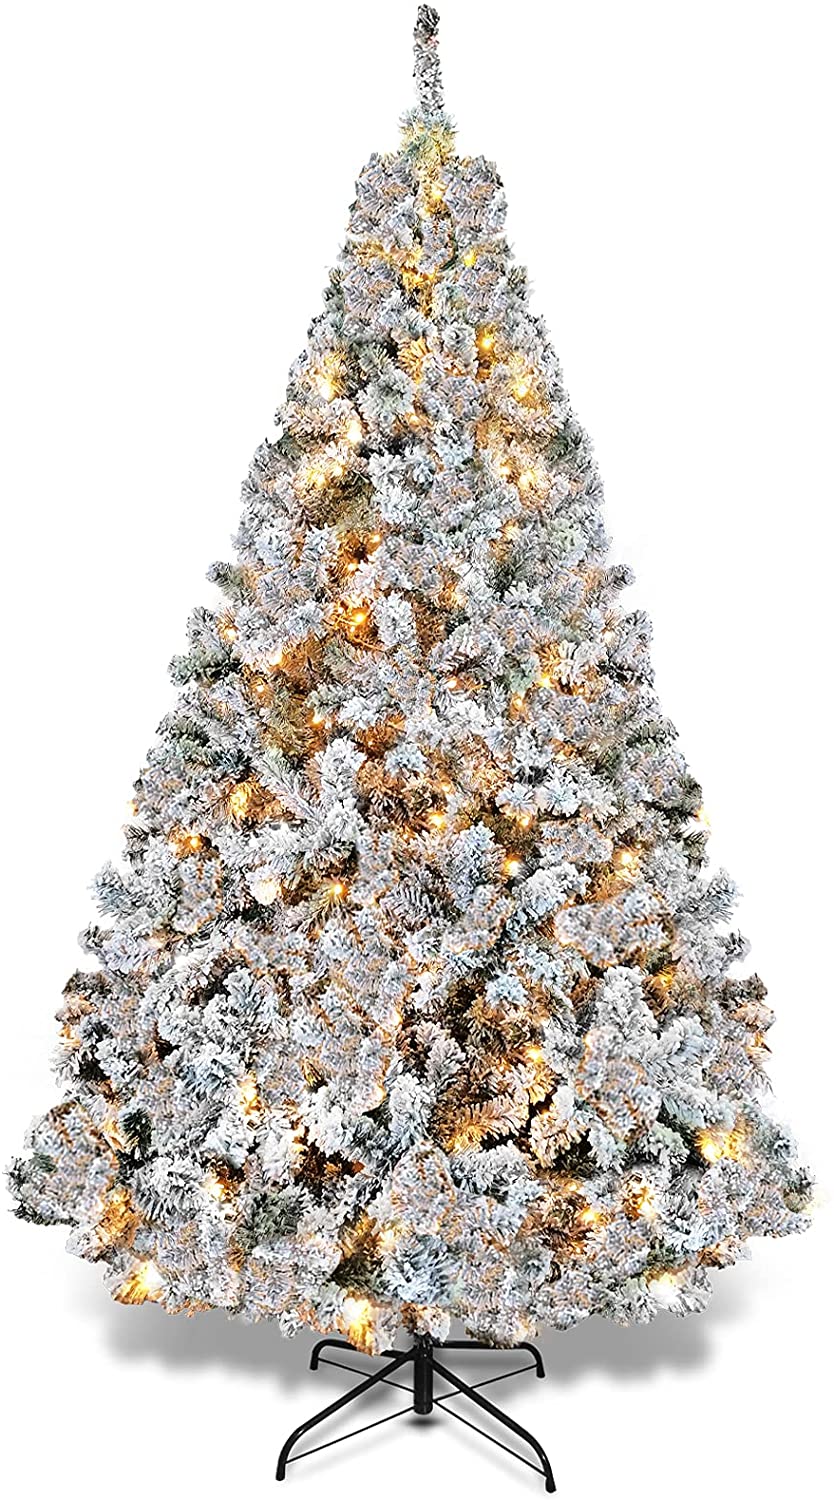 Details about   Artificial Christmas Tree 6ft 180cm W/ Metal Stand Artificial Pine Tree 800 Tips 